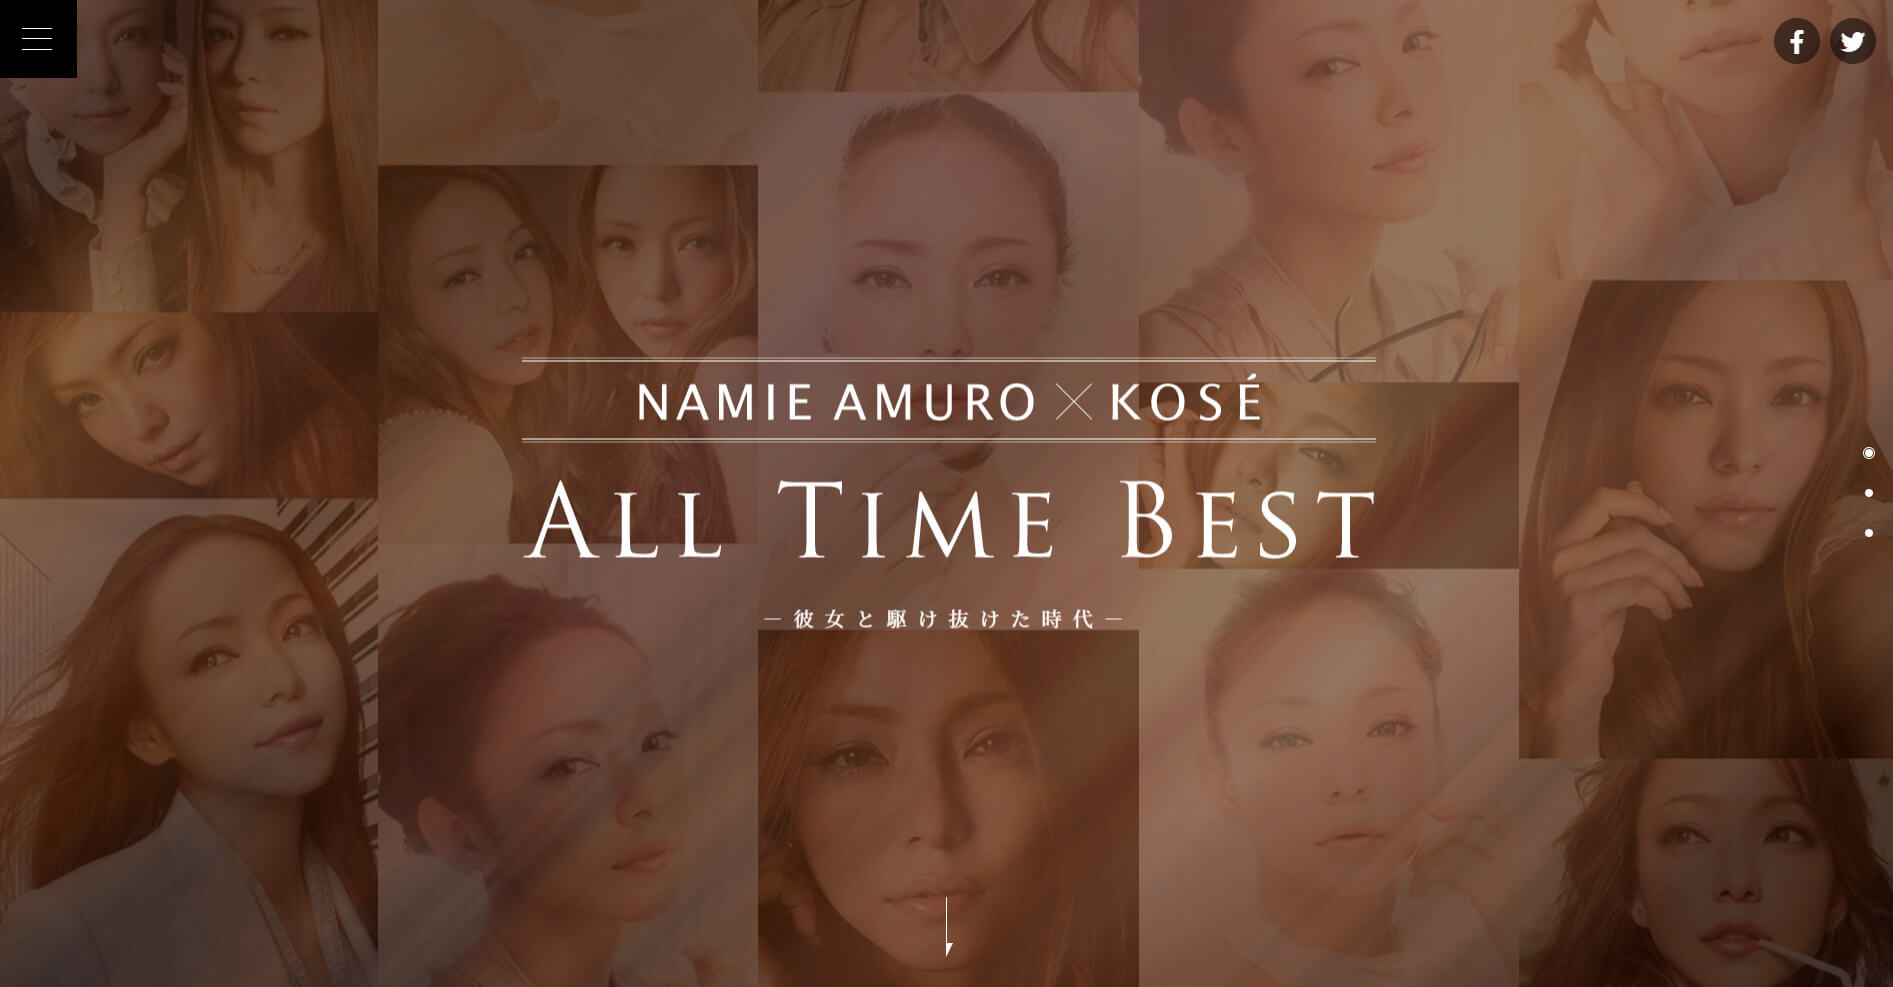 Namie Amuro S Best Beauty Cuts Featured In New Kose Commercial Moshi Moshi Nippon もしもしにっぽん